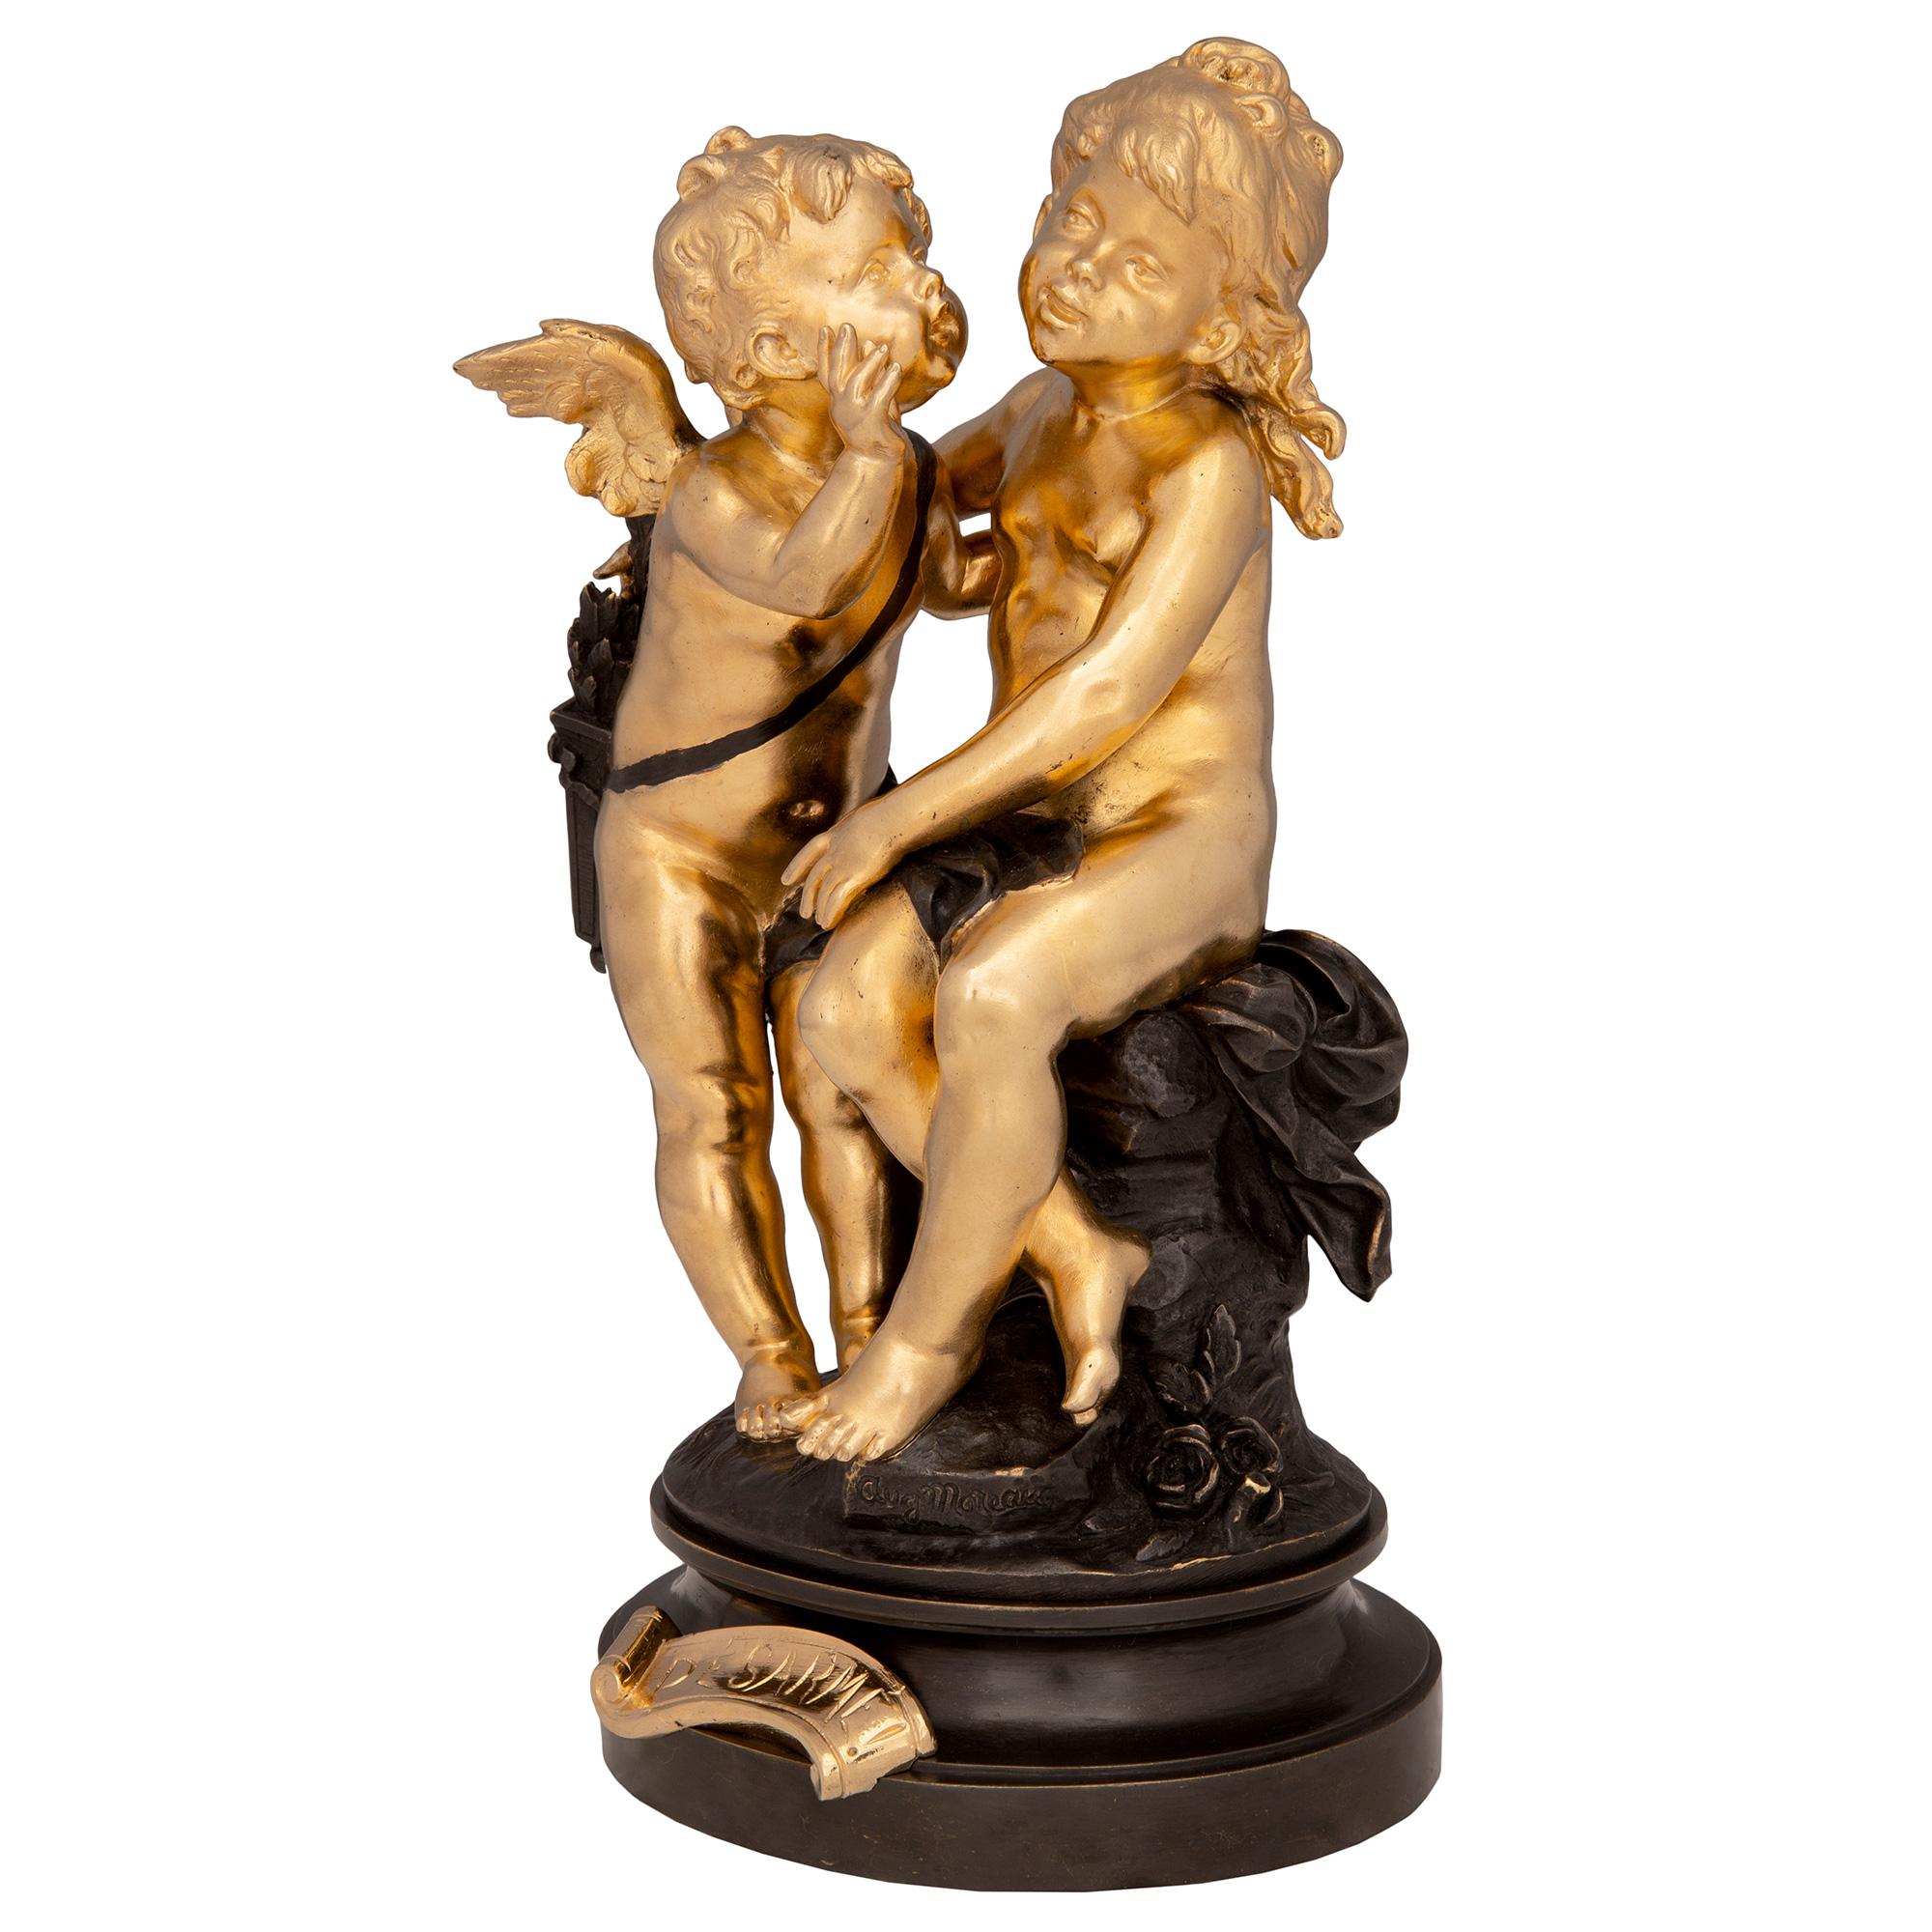 A charming and high quality French 19th century Louis XVI st. ormolu and patinated bronze statue of young Cupid and Psyche, titled 